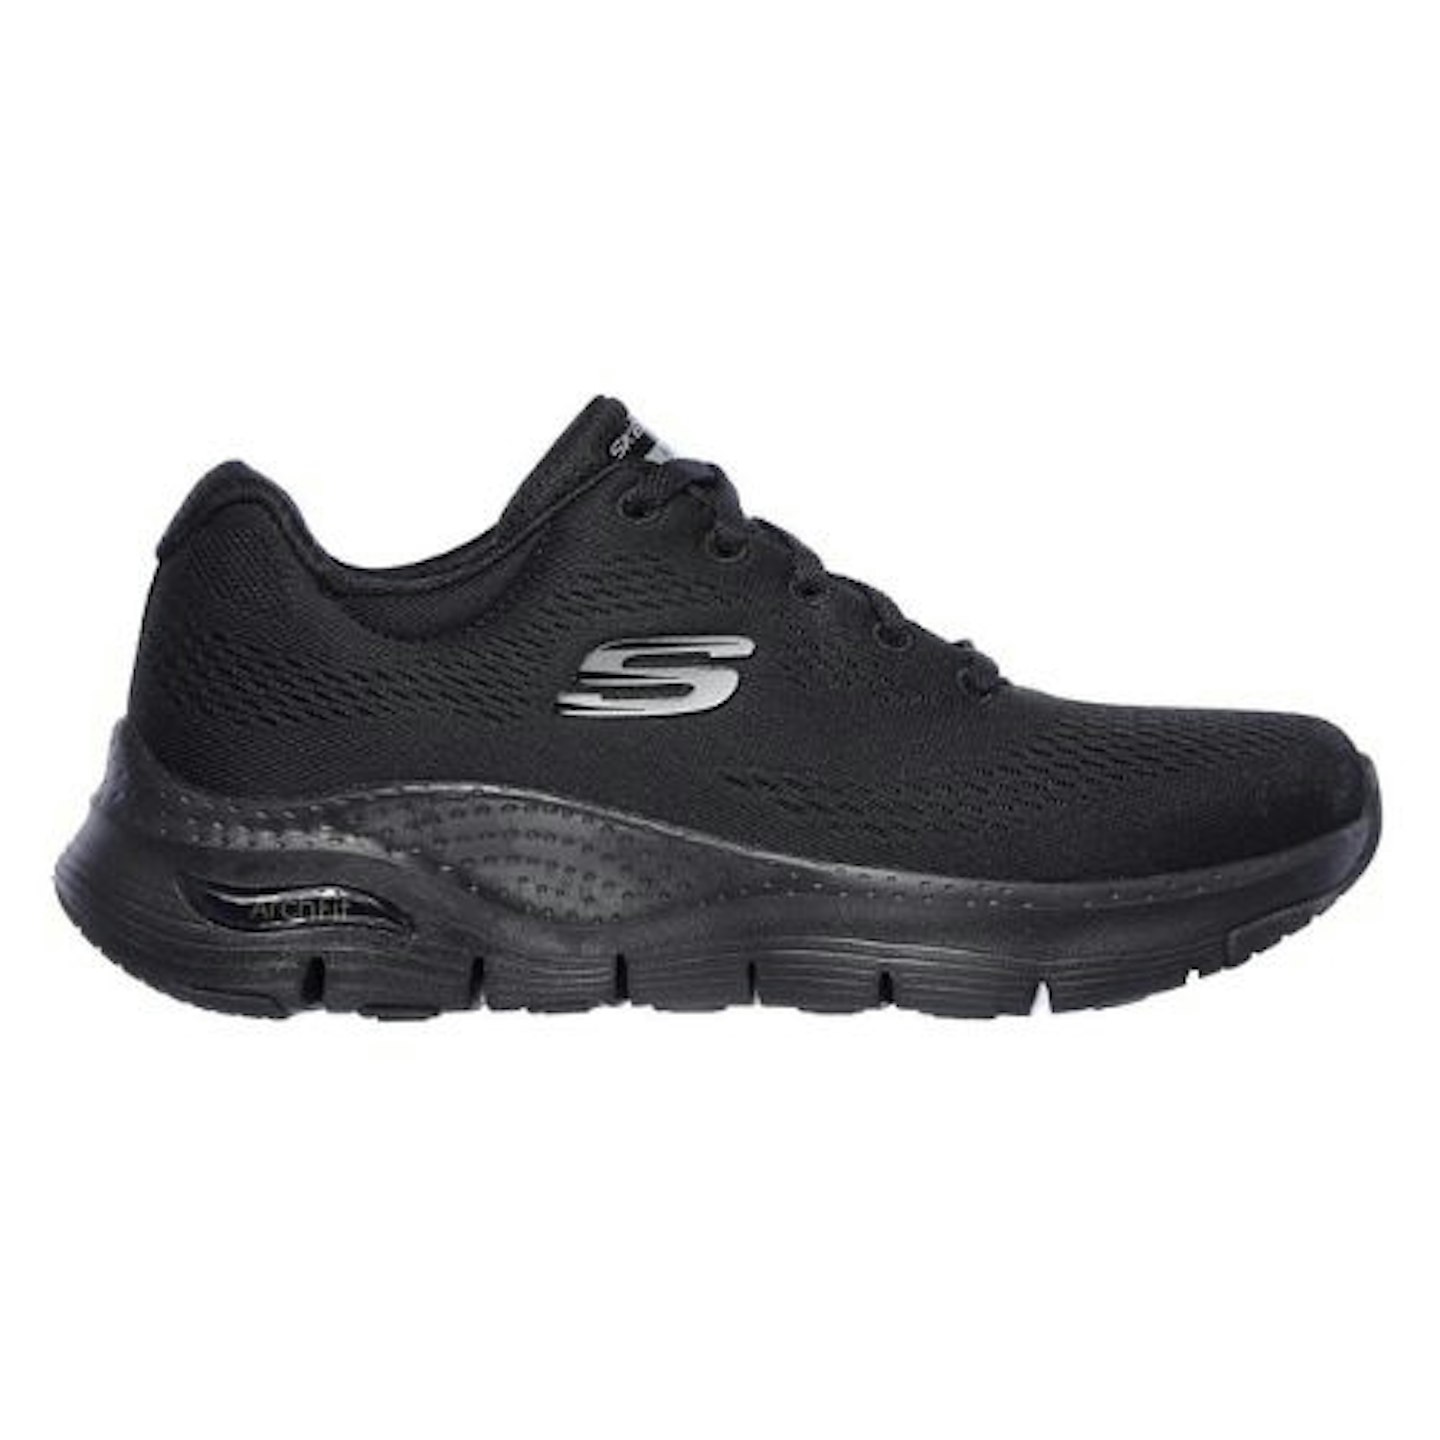 Sketchers Arch Fit Big Appeal Trainers Wide Fit